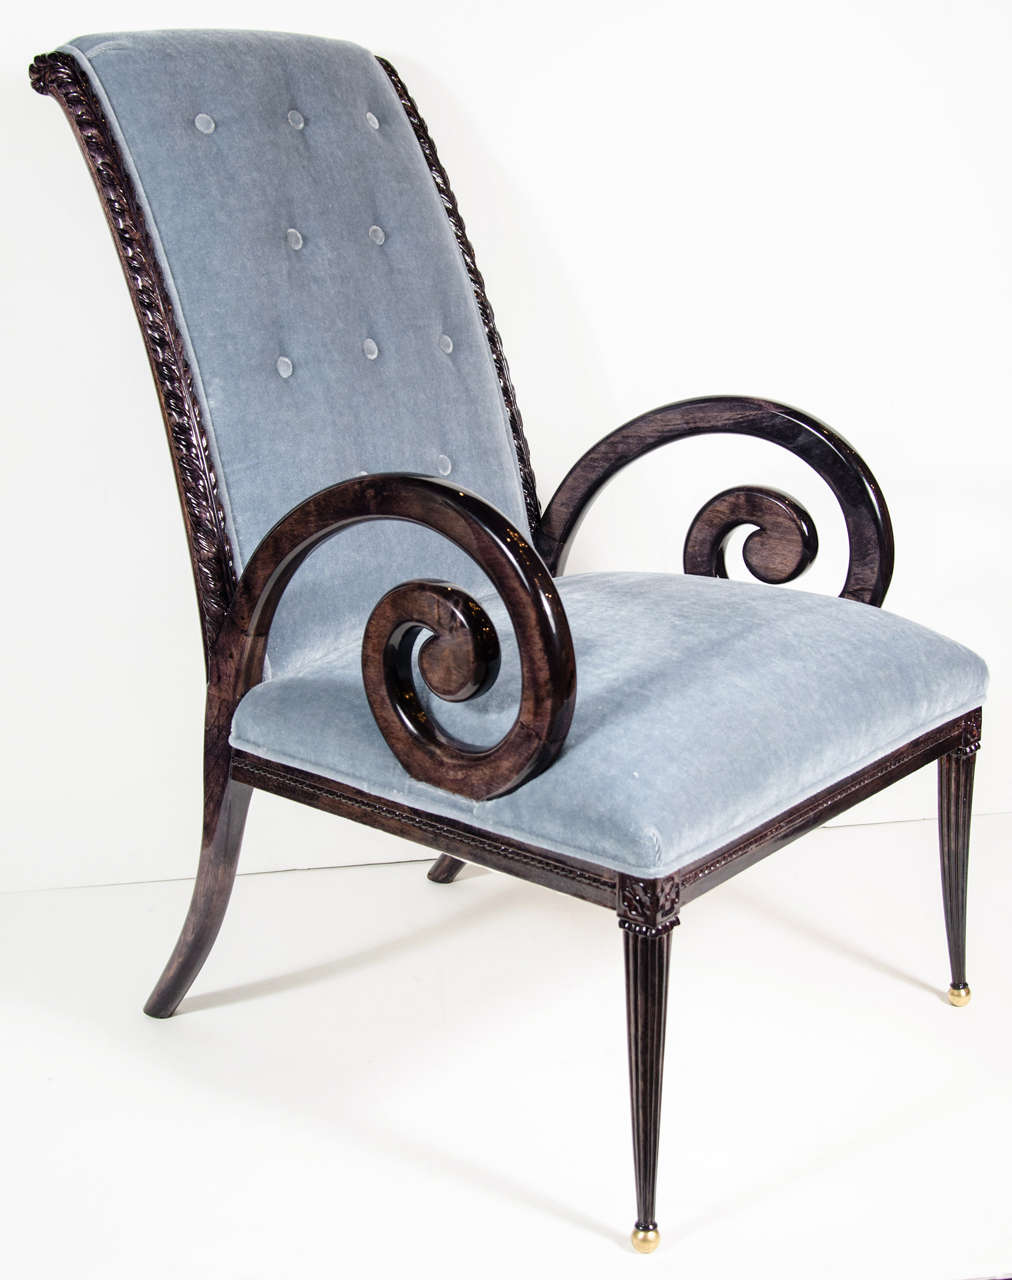 These stunning chairs features a spiral arm design and hand carved stylized plume detailing all in ebonized walnut with gilt tips on the feet. They also feature button back detailing and have been newly upholstered in a Grey Blue mohair.